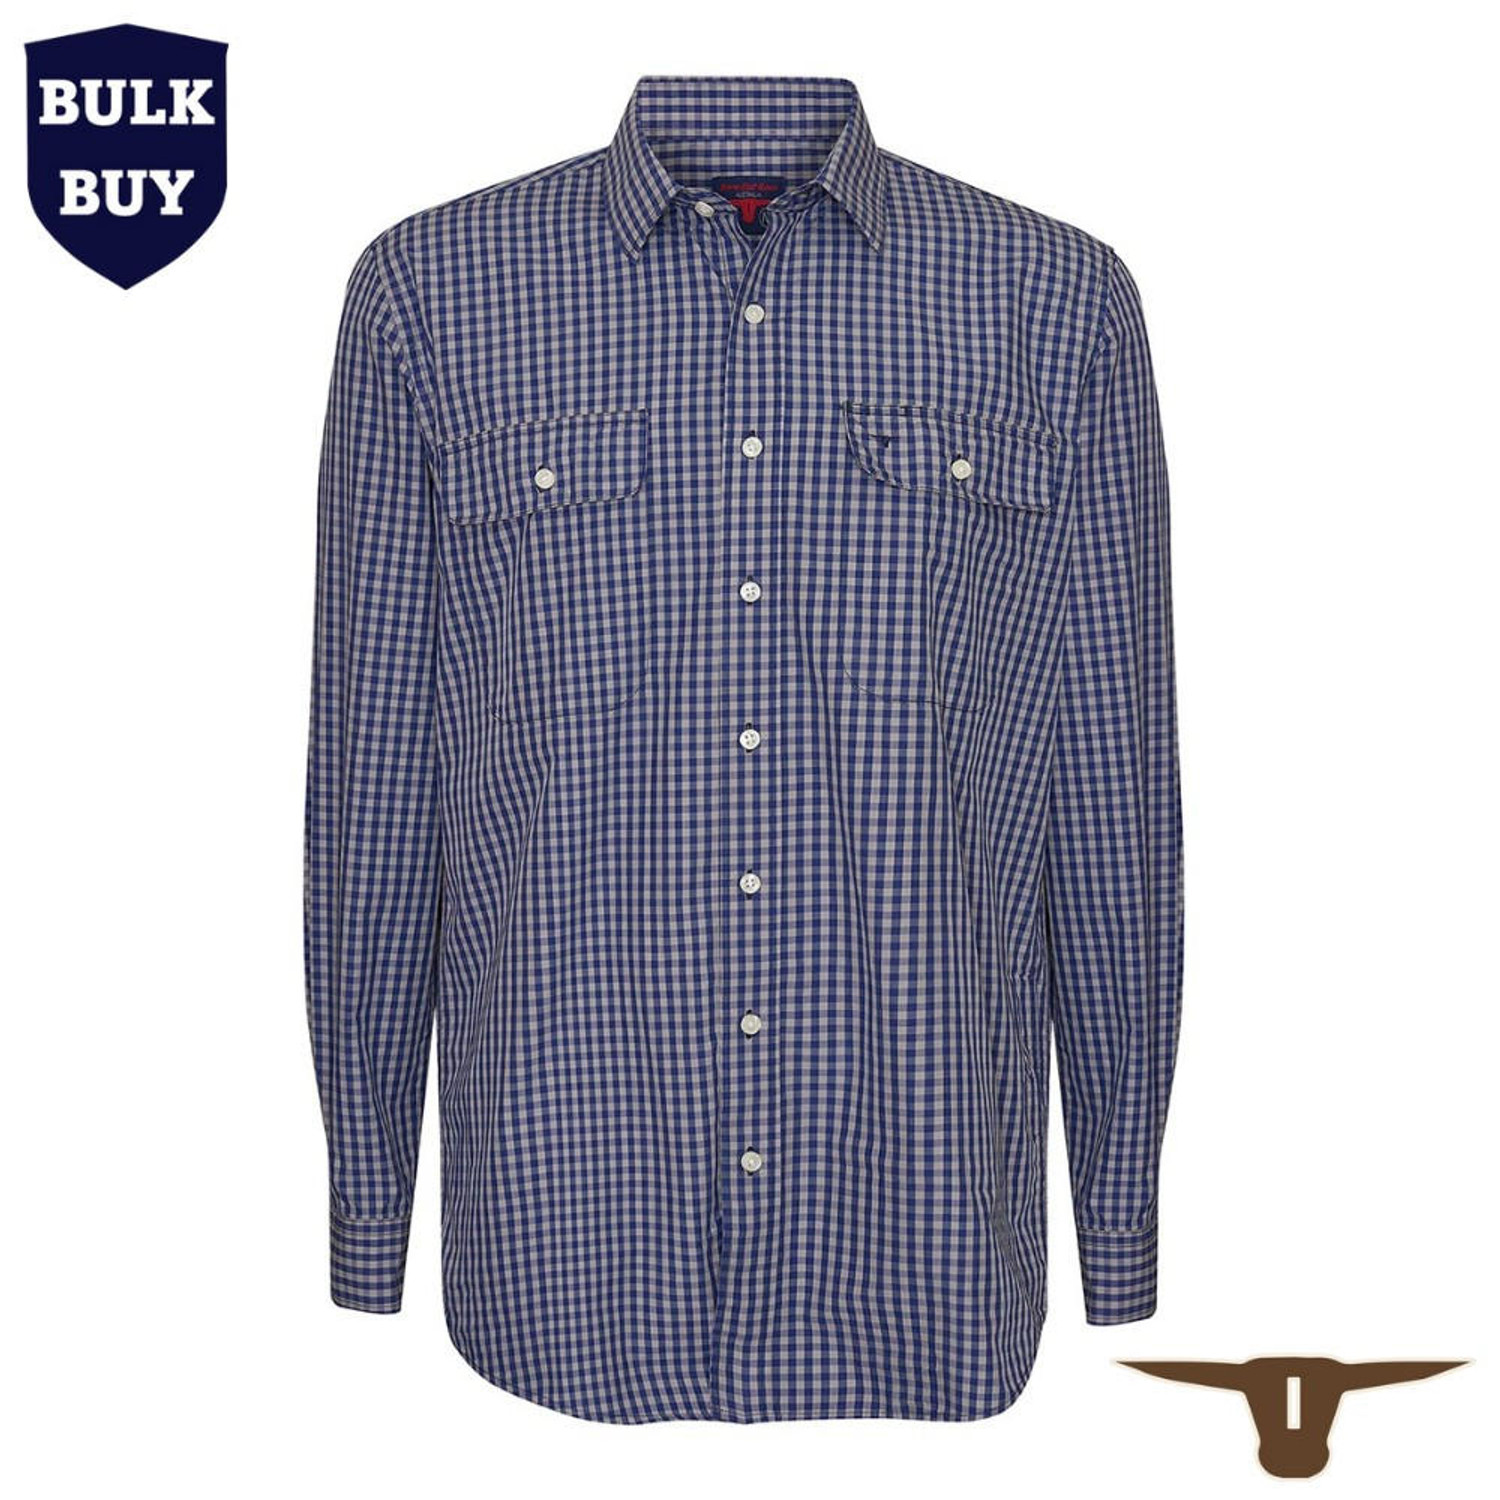  Born Out Here Mens Long Sleeve Open Front Shirt in Navy/Puty Medium Check (Bulk Deal Buy 4+ for $89.95 each) 